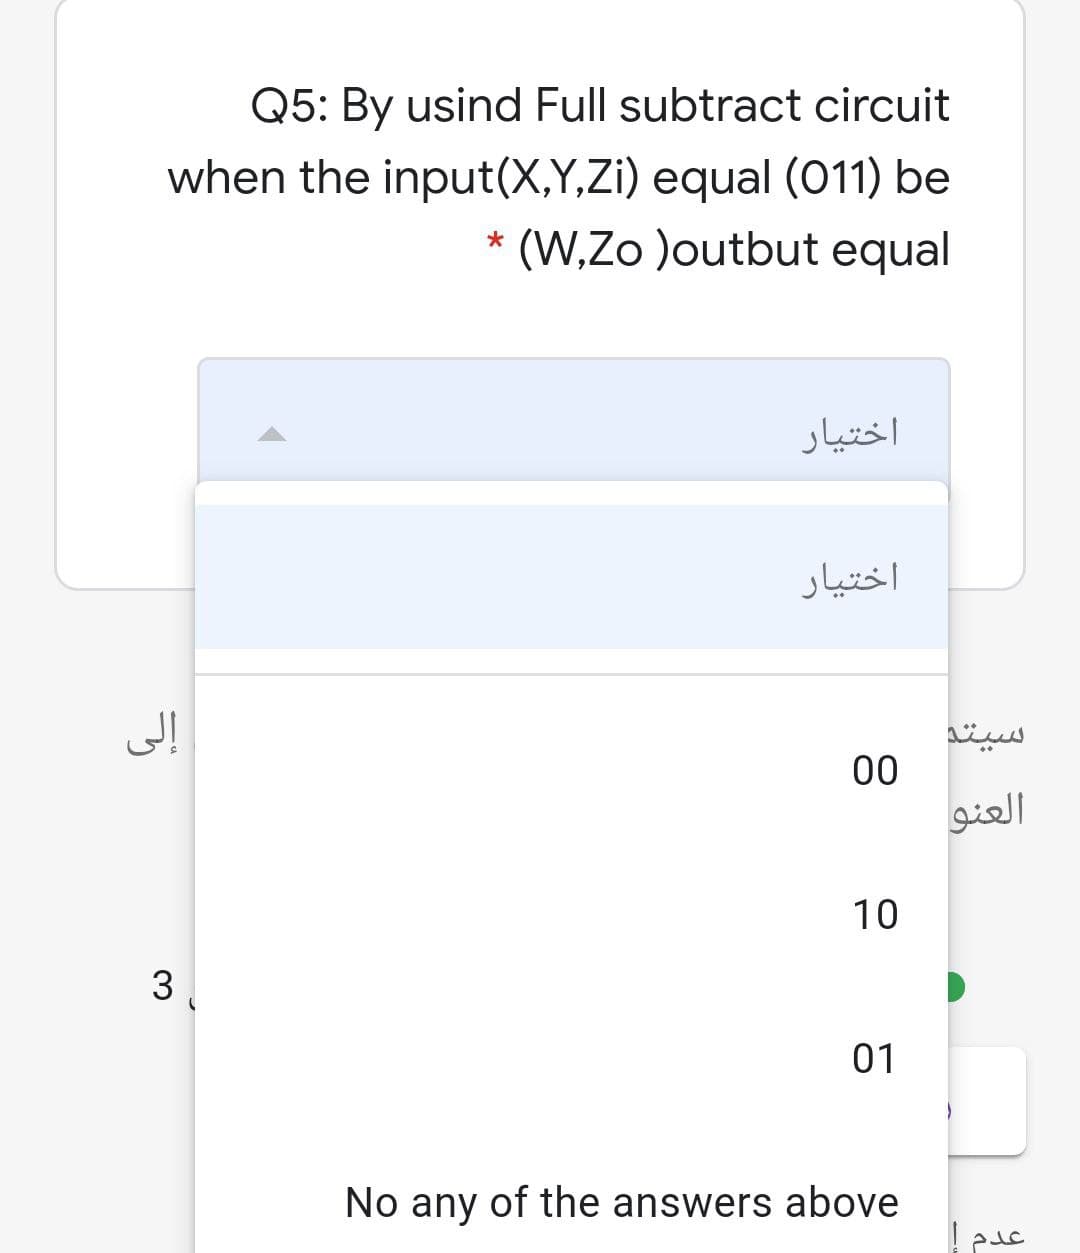 Q5: By usind Full subtract circuit
when the input(X,Y,Zi) equal (011) be
* (W,Zo )outbut equal
اختیار
اختیار
سیتد
00
العنو
10
3
01
No any of the answers above
عدم
